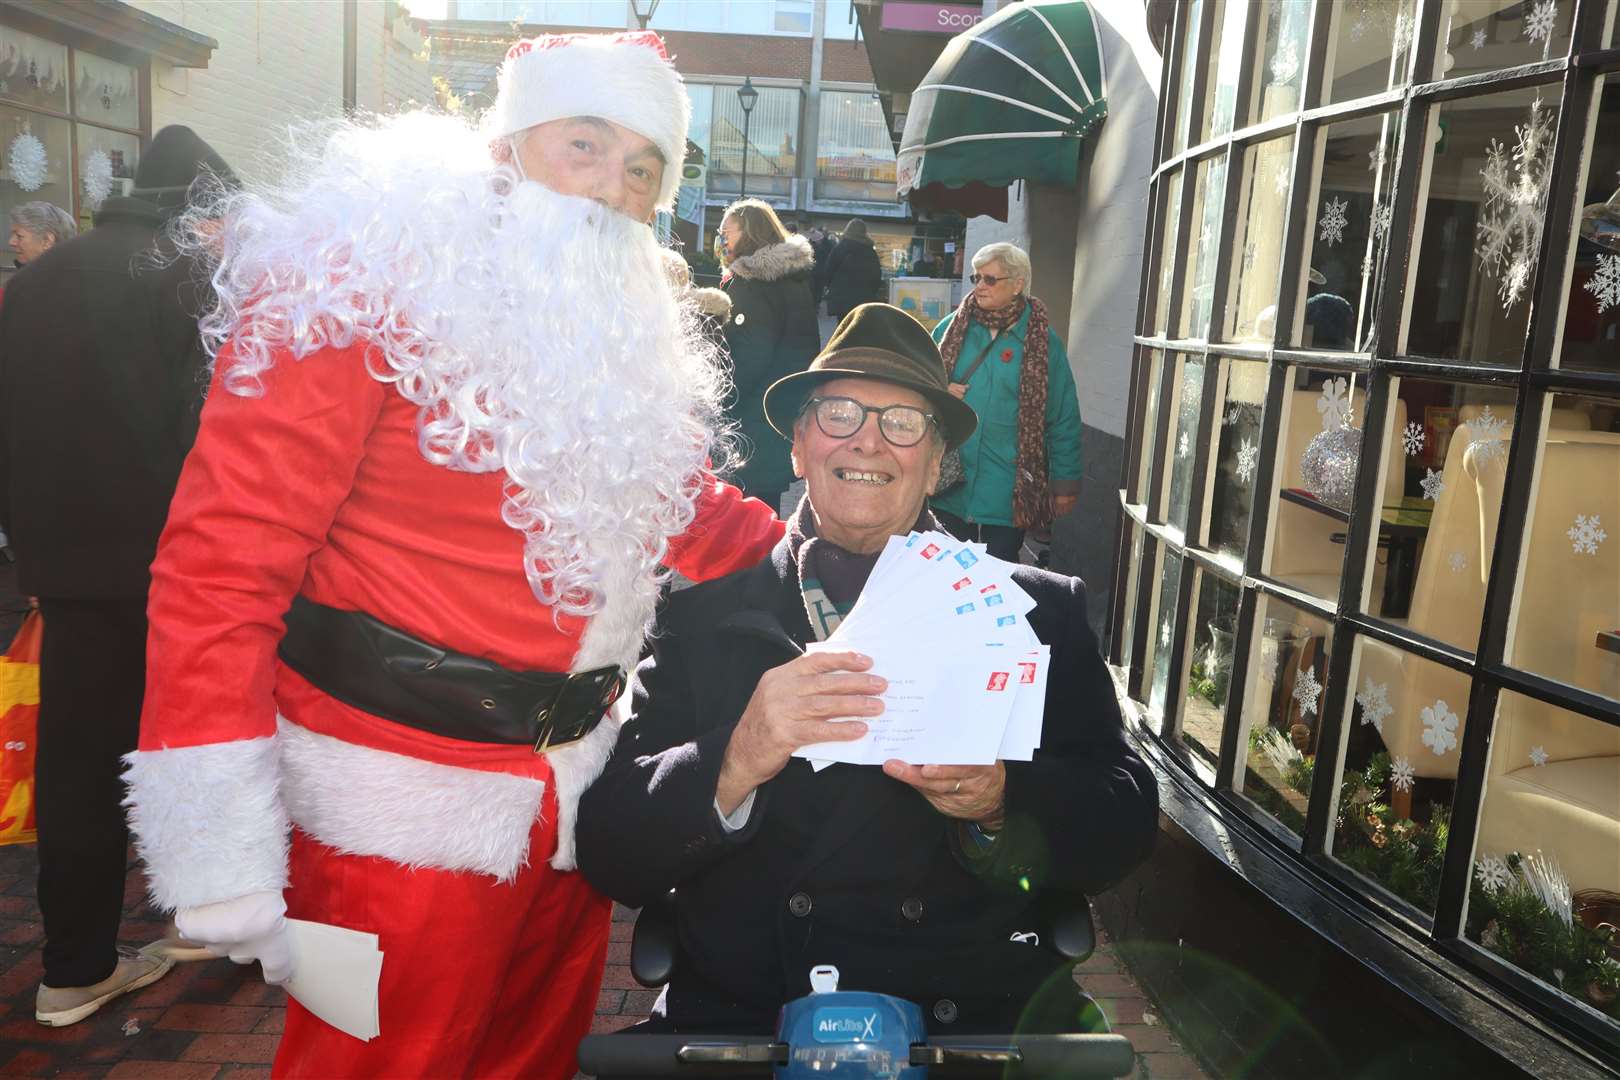 Sittingbourne's 'whistling postman' Dale Howting, pictured with some of cheques he will be posting, along with Santa Mike Day from the Methodist church, has collected £12,800 for charity this year